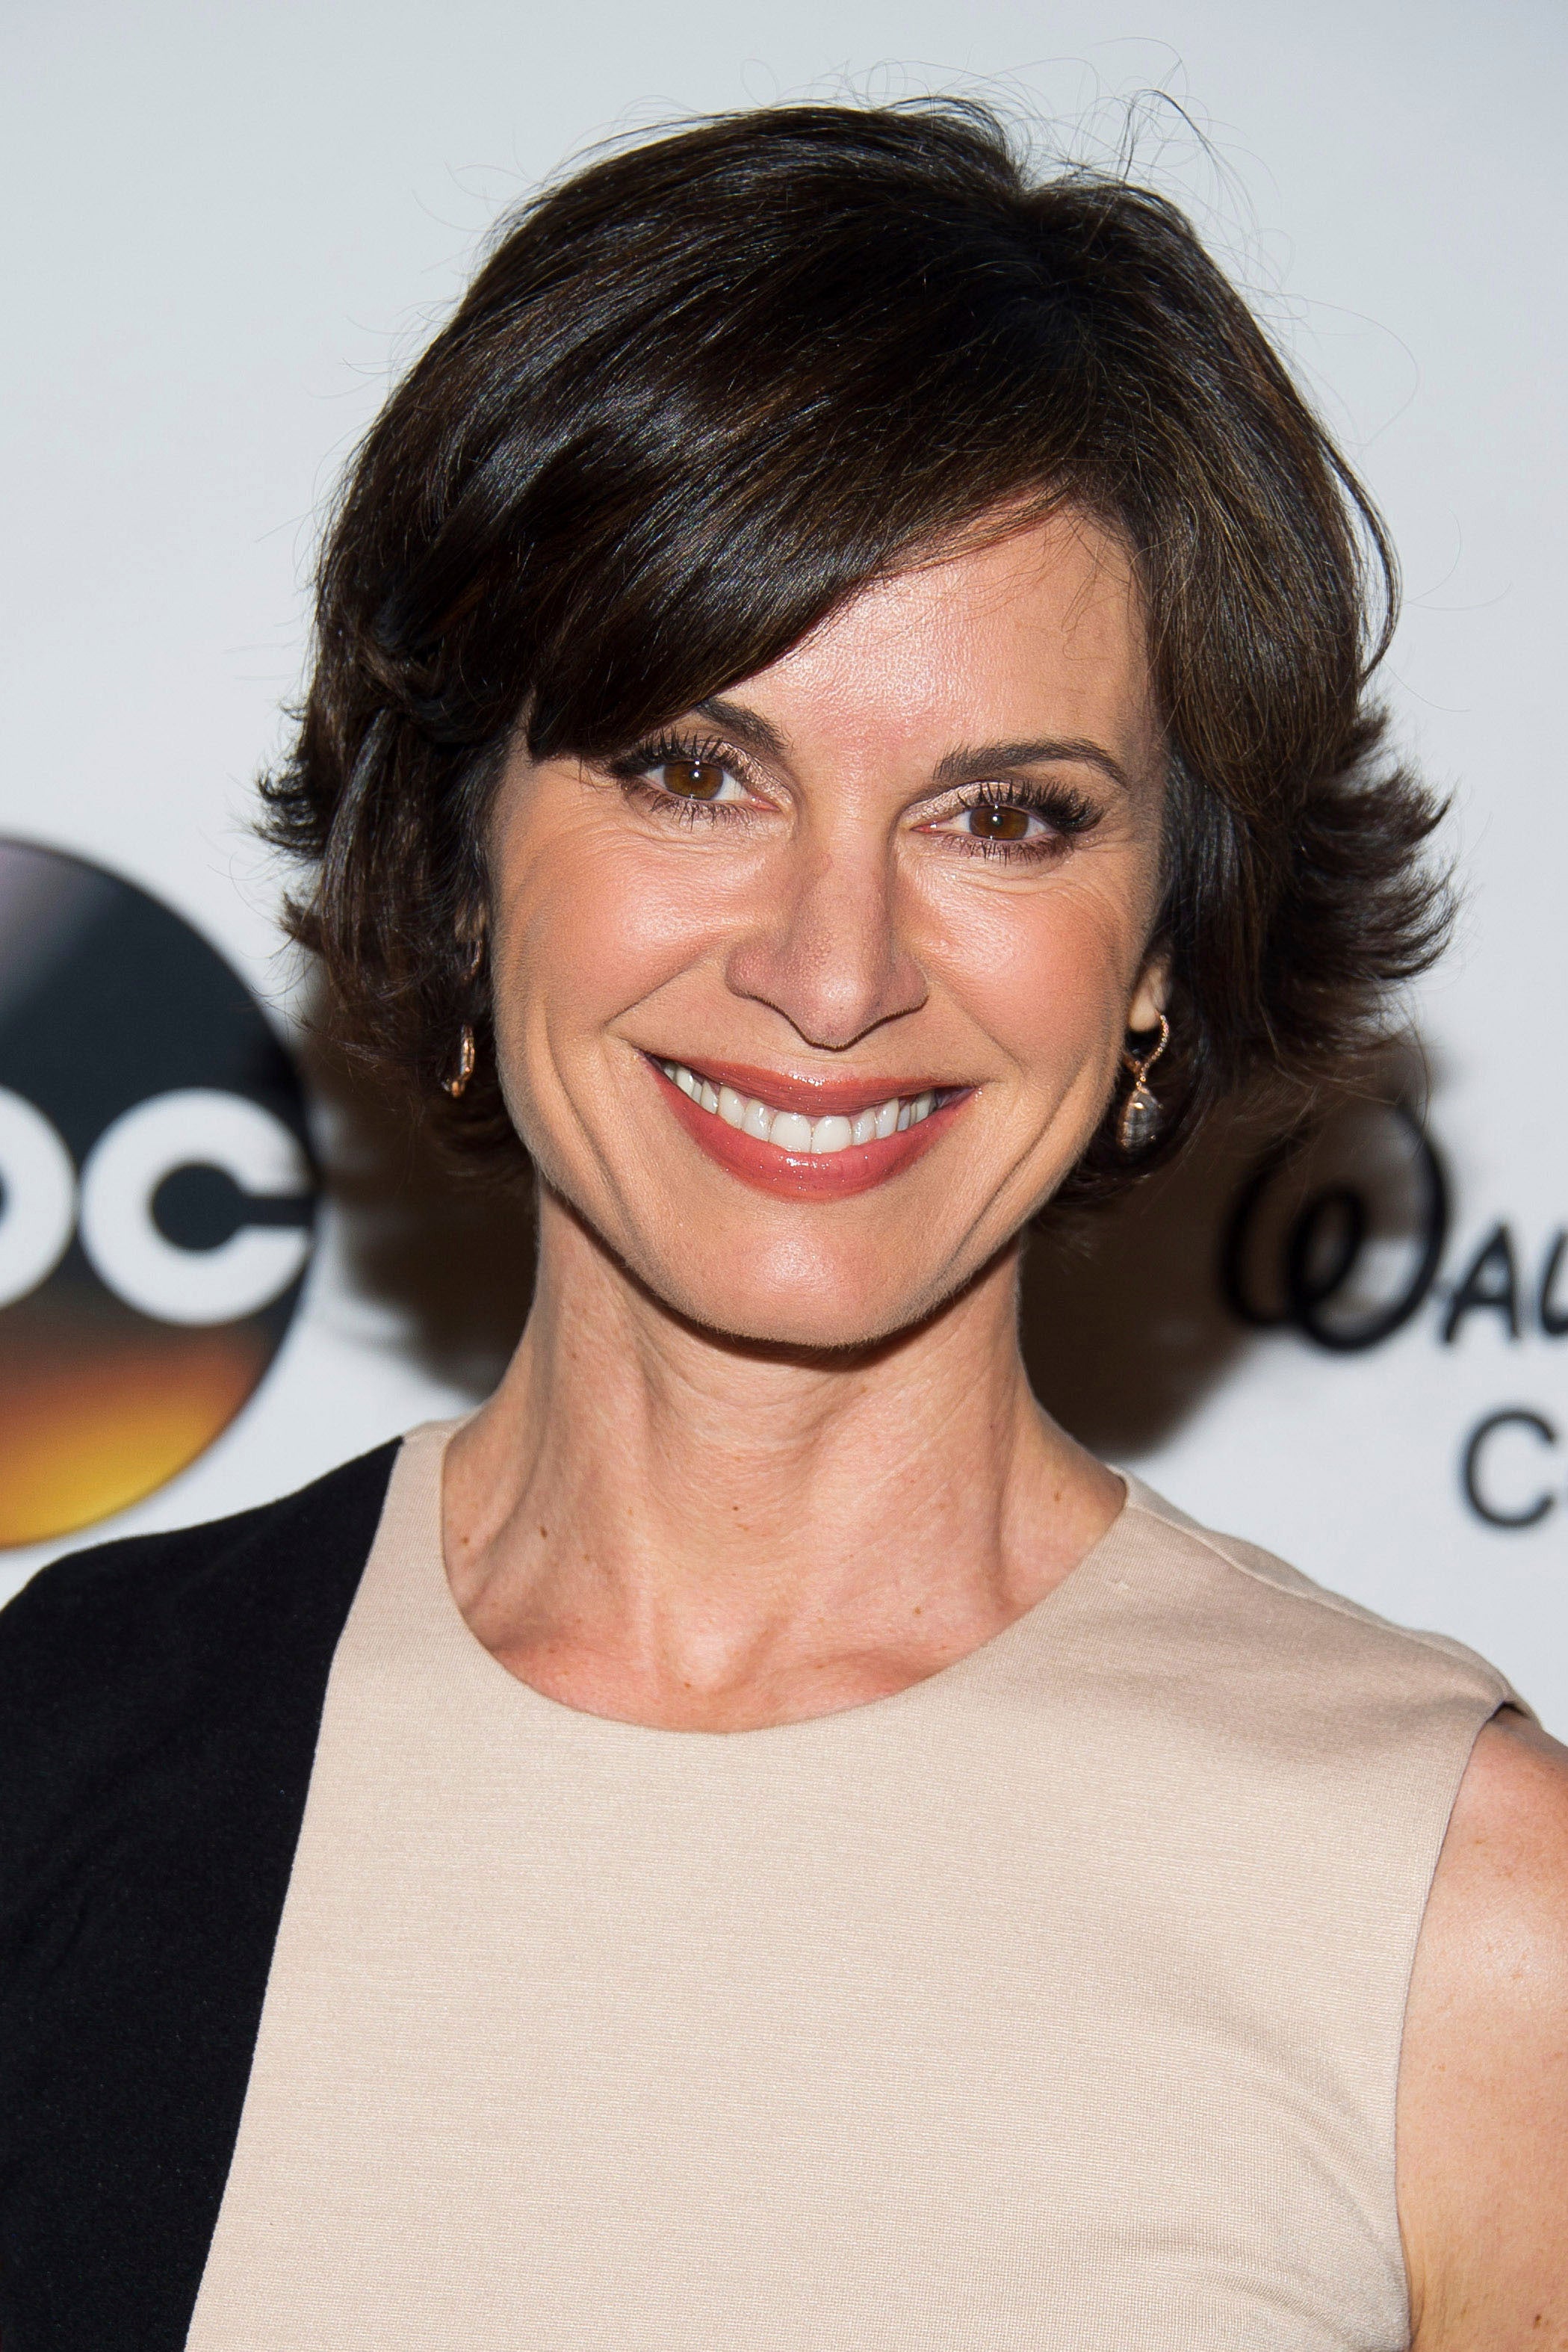 Elizabeth Vargas attends "A Celebration of Barbara Walters" at the Four Seasons Restaurant, 14 May 2014, in New York.